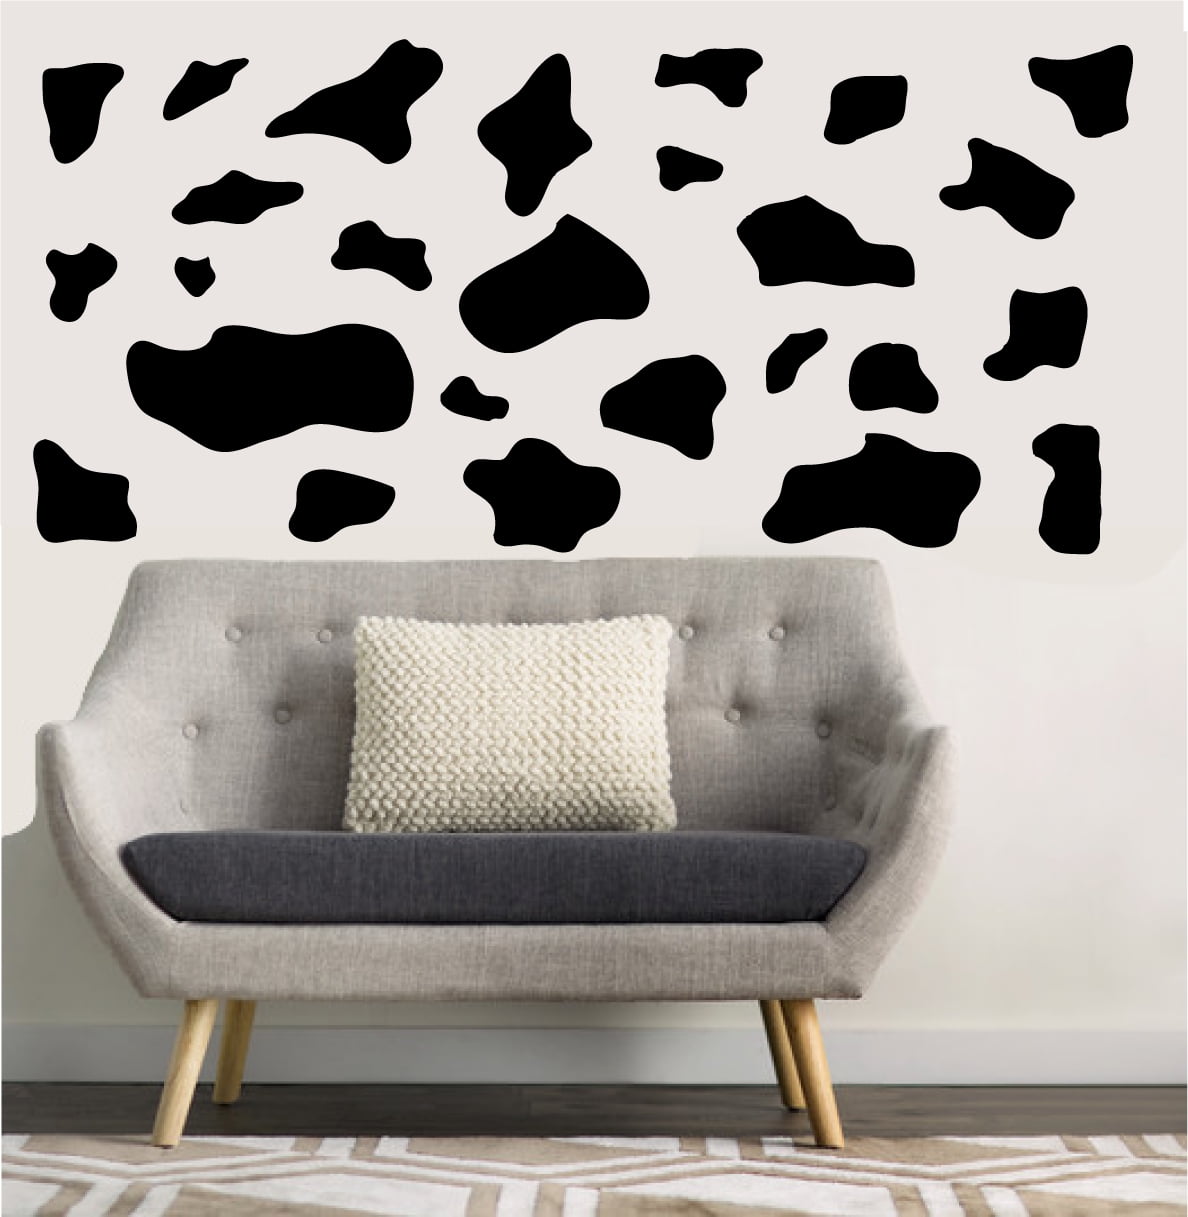 600Pcs Cow Print Stickers, Self-Adhesive Wall Decals Vinyl Print, Black  Waterproof Animal Stickers for Cow Themed Bathroom, Nursery, Bedroom and